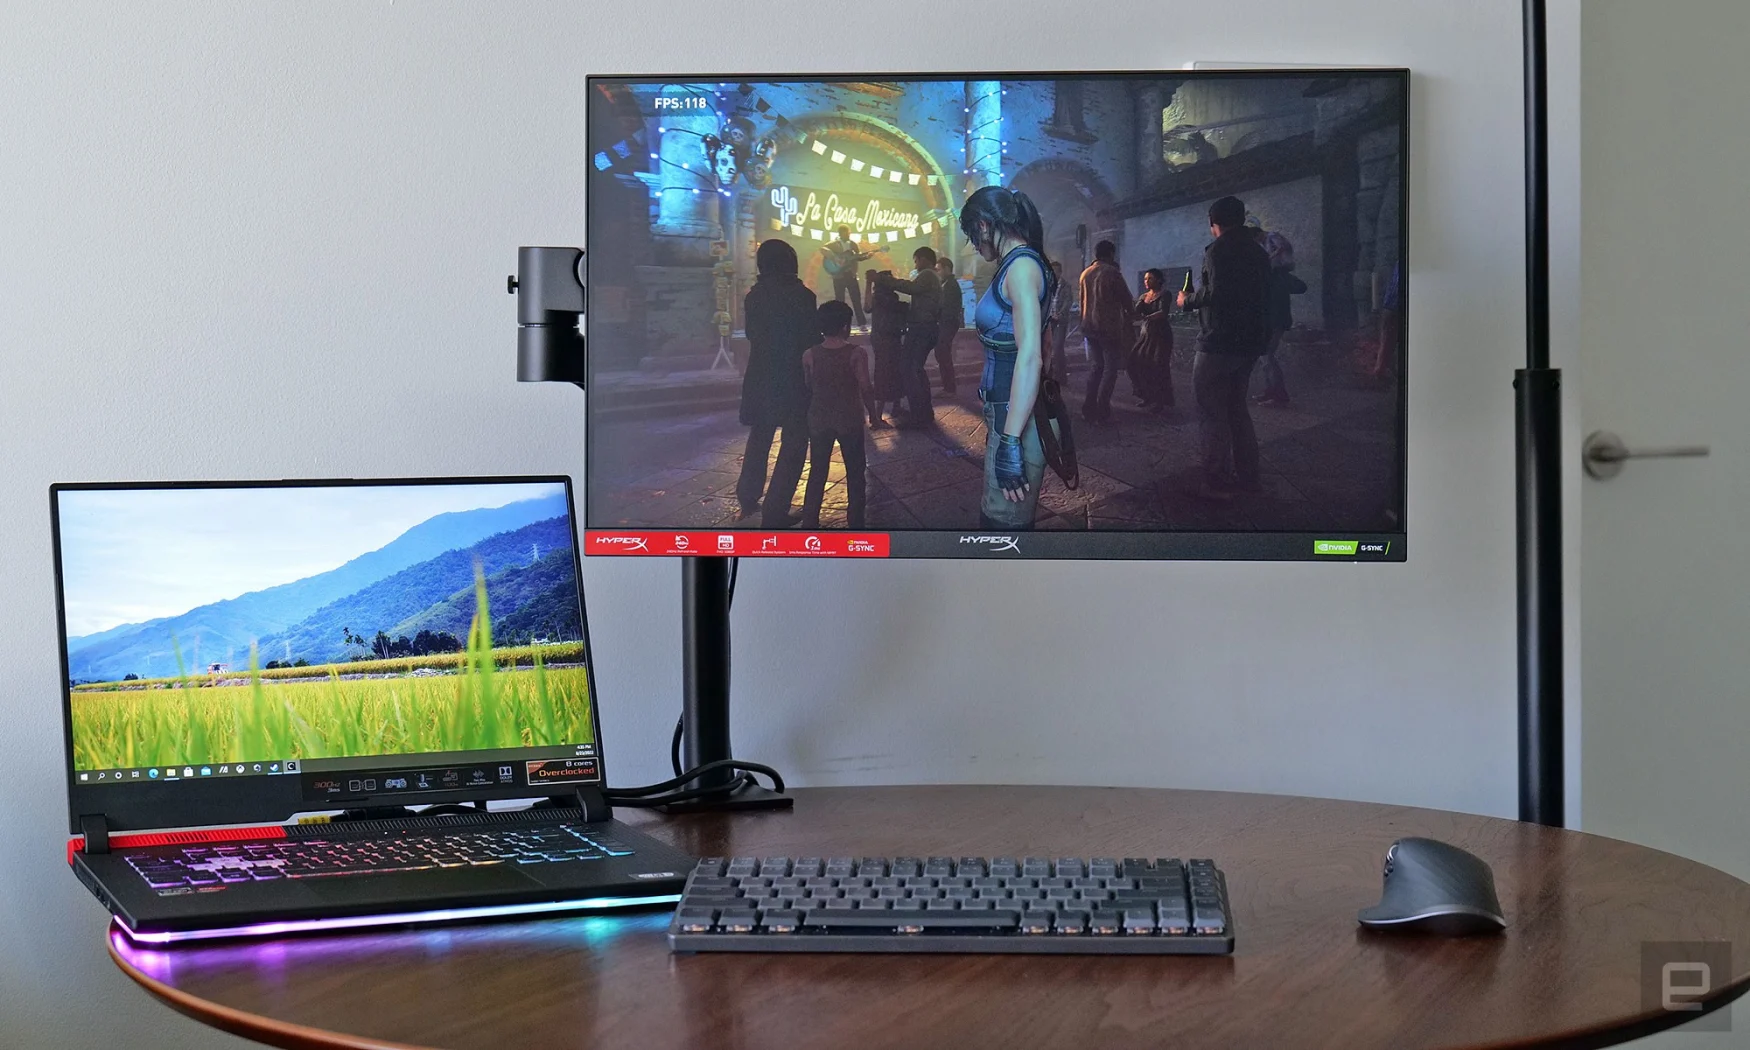 Unlike other monitors, HyperX's Armada line of gaming monitors has ditched the traditional desktop stand in favor of an included monitor arm for a less cluttered, more adjustable setup. 